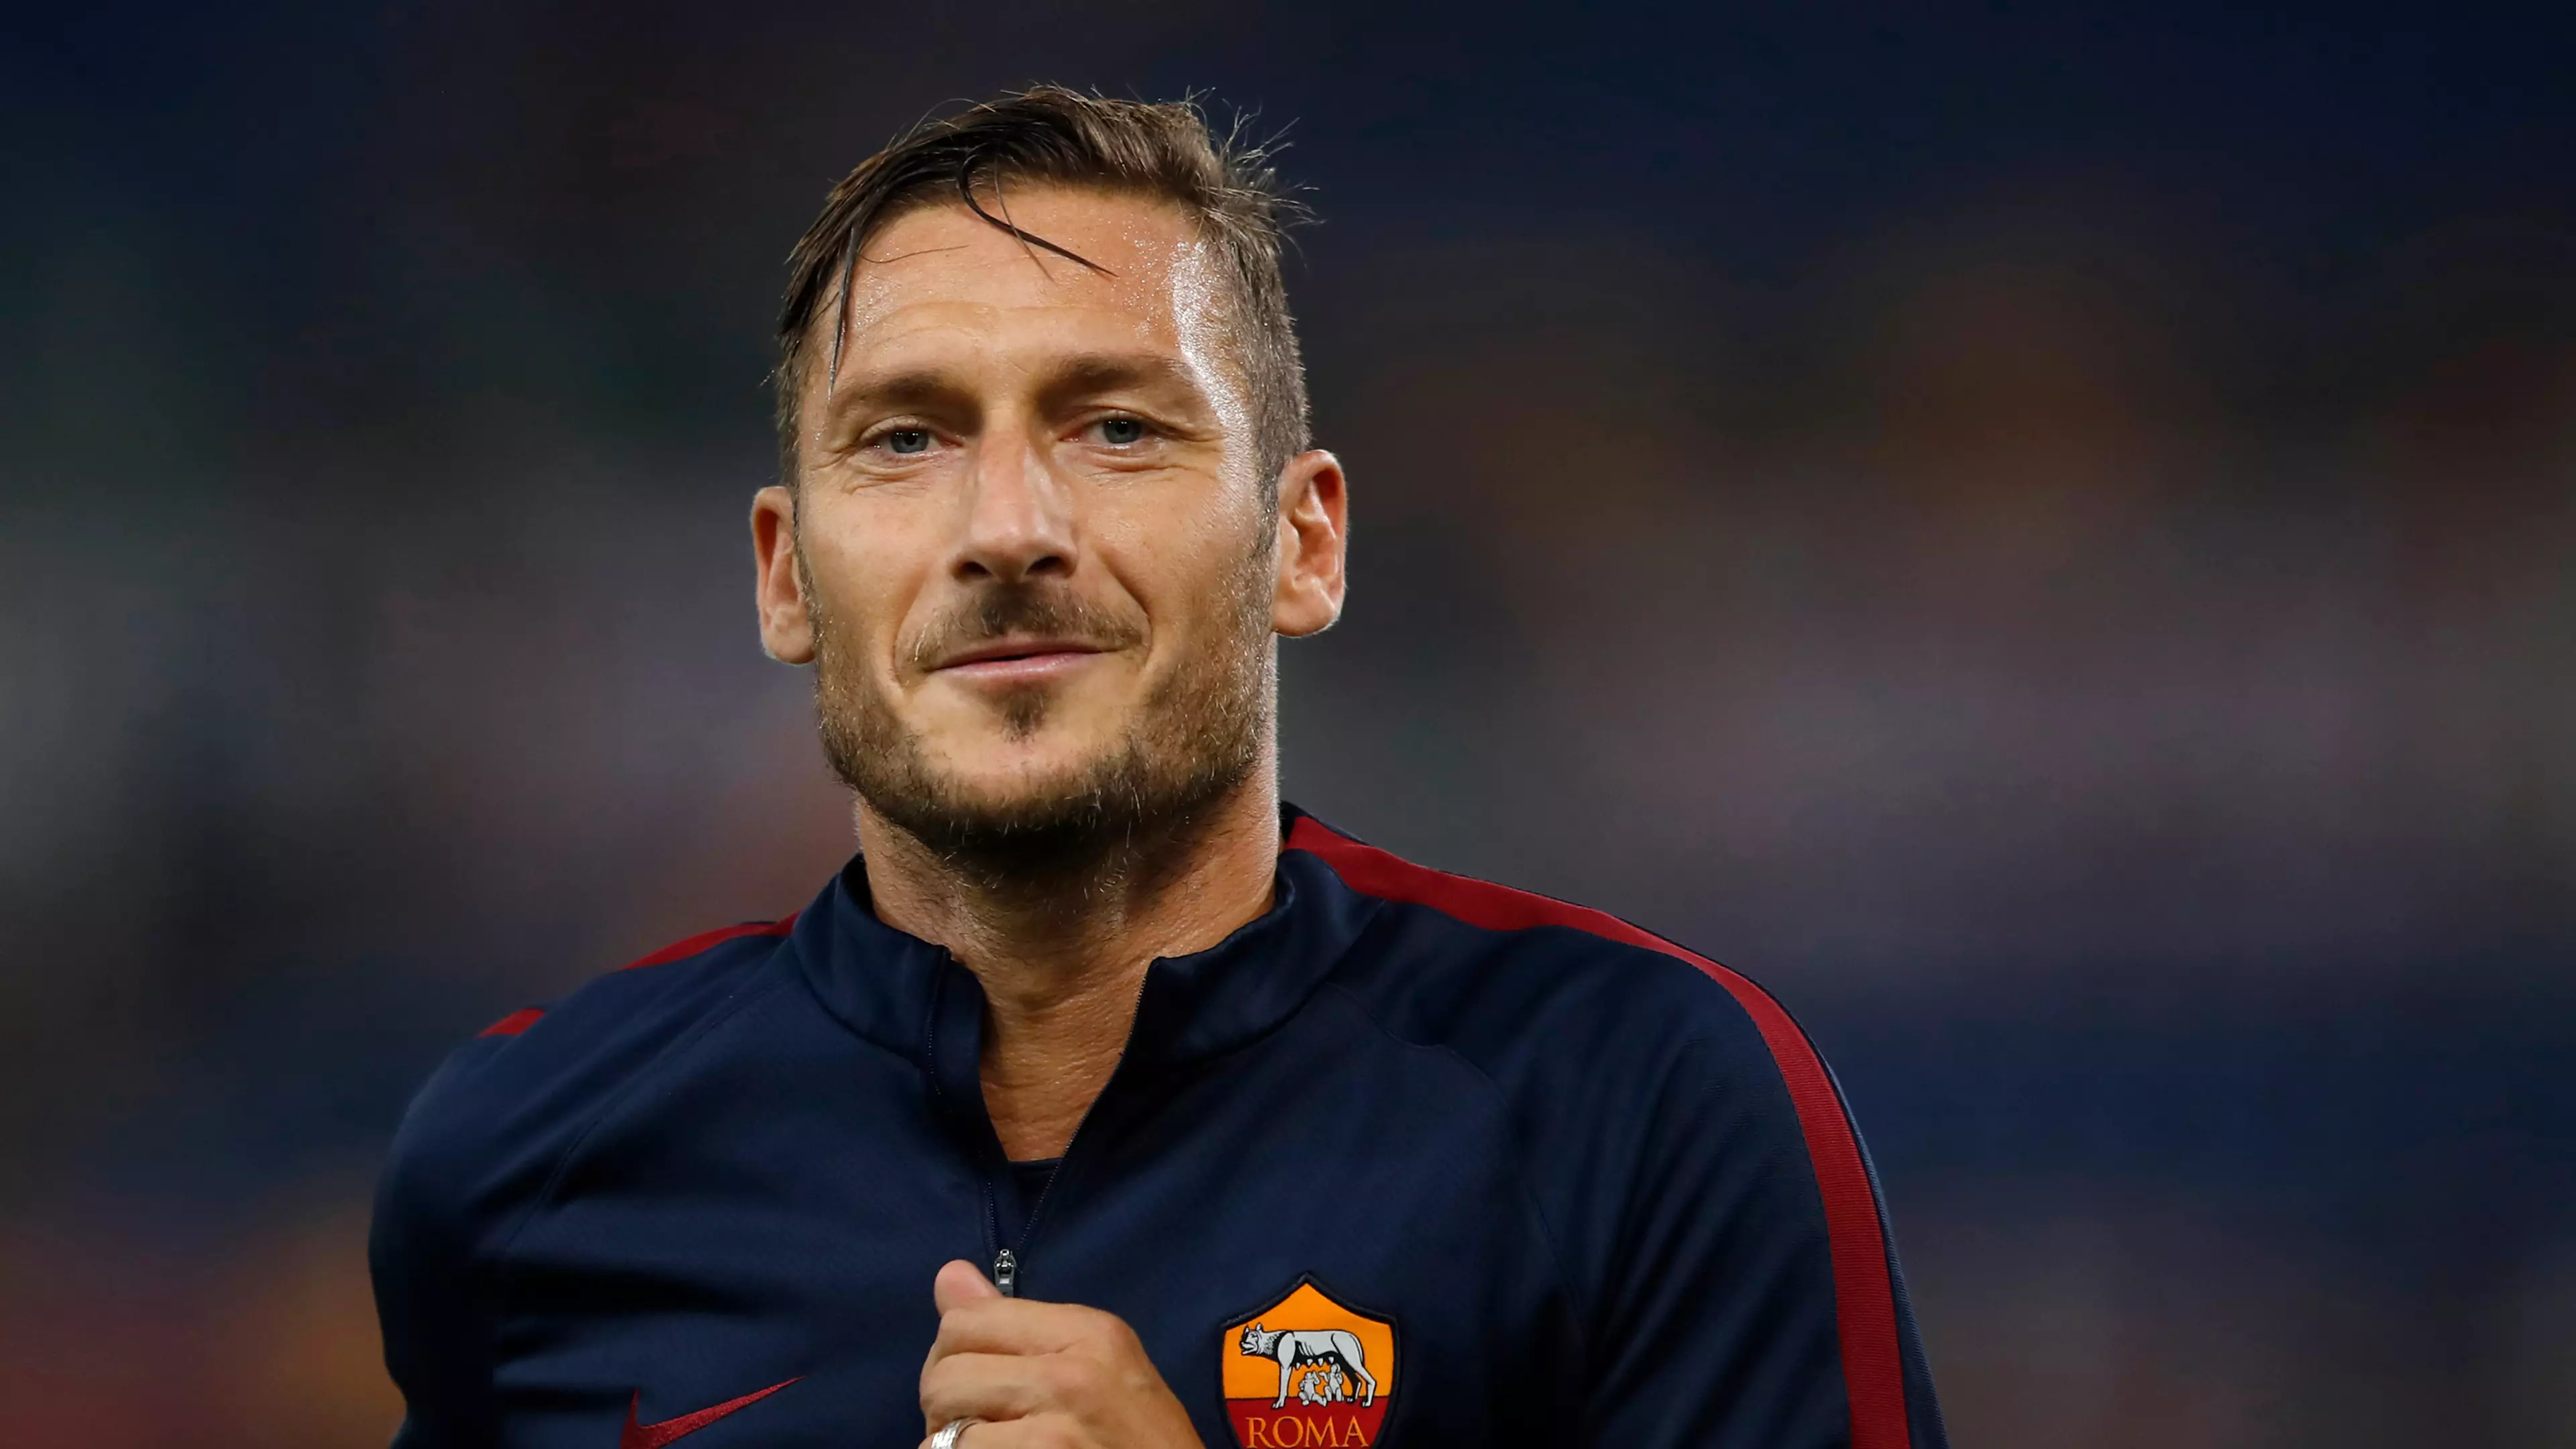 BREAKING: Francesco Totti Has Officially Played His Final Game For Roma